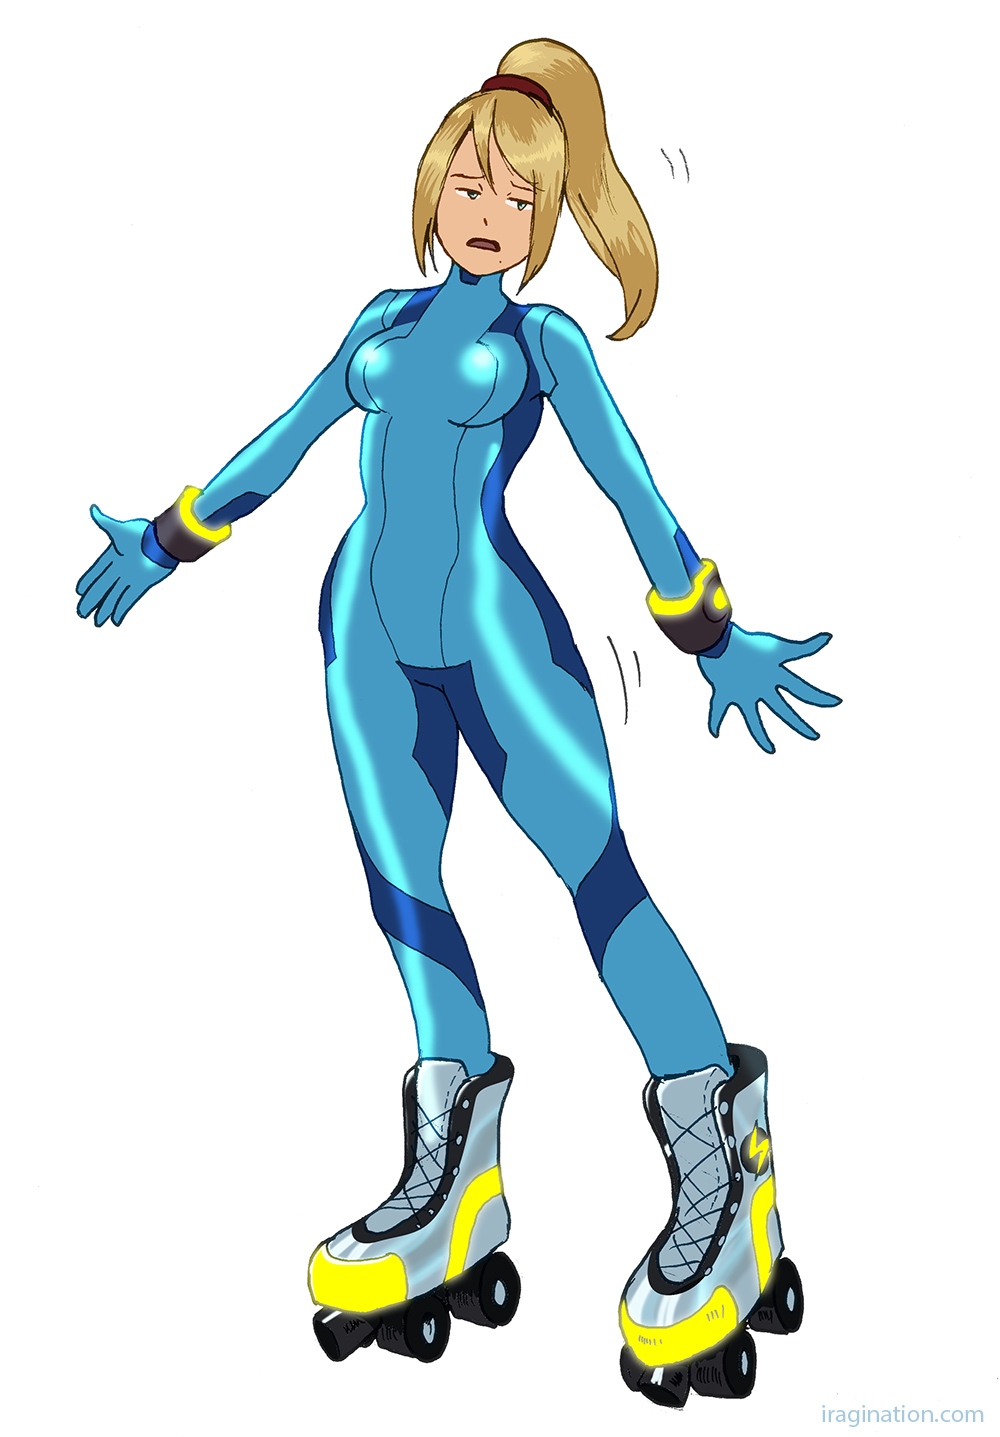 Roller Skates Zero Suit Samus
At E3 2018 there was no news about Metroid Prime 4. So I set out to draw Samus on roller skates because that's what those boots of hers look like to me most of the time. Hopefully, we'll get some news later this year or at the next E3.

Metroid (C) Nintendo.
Keywords: samus